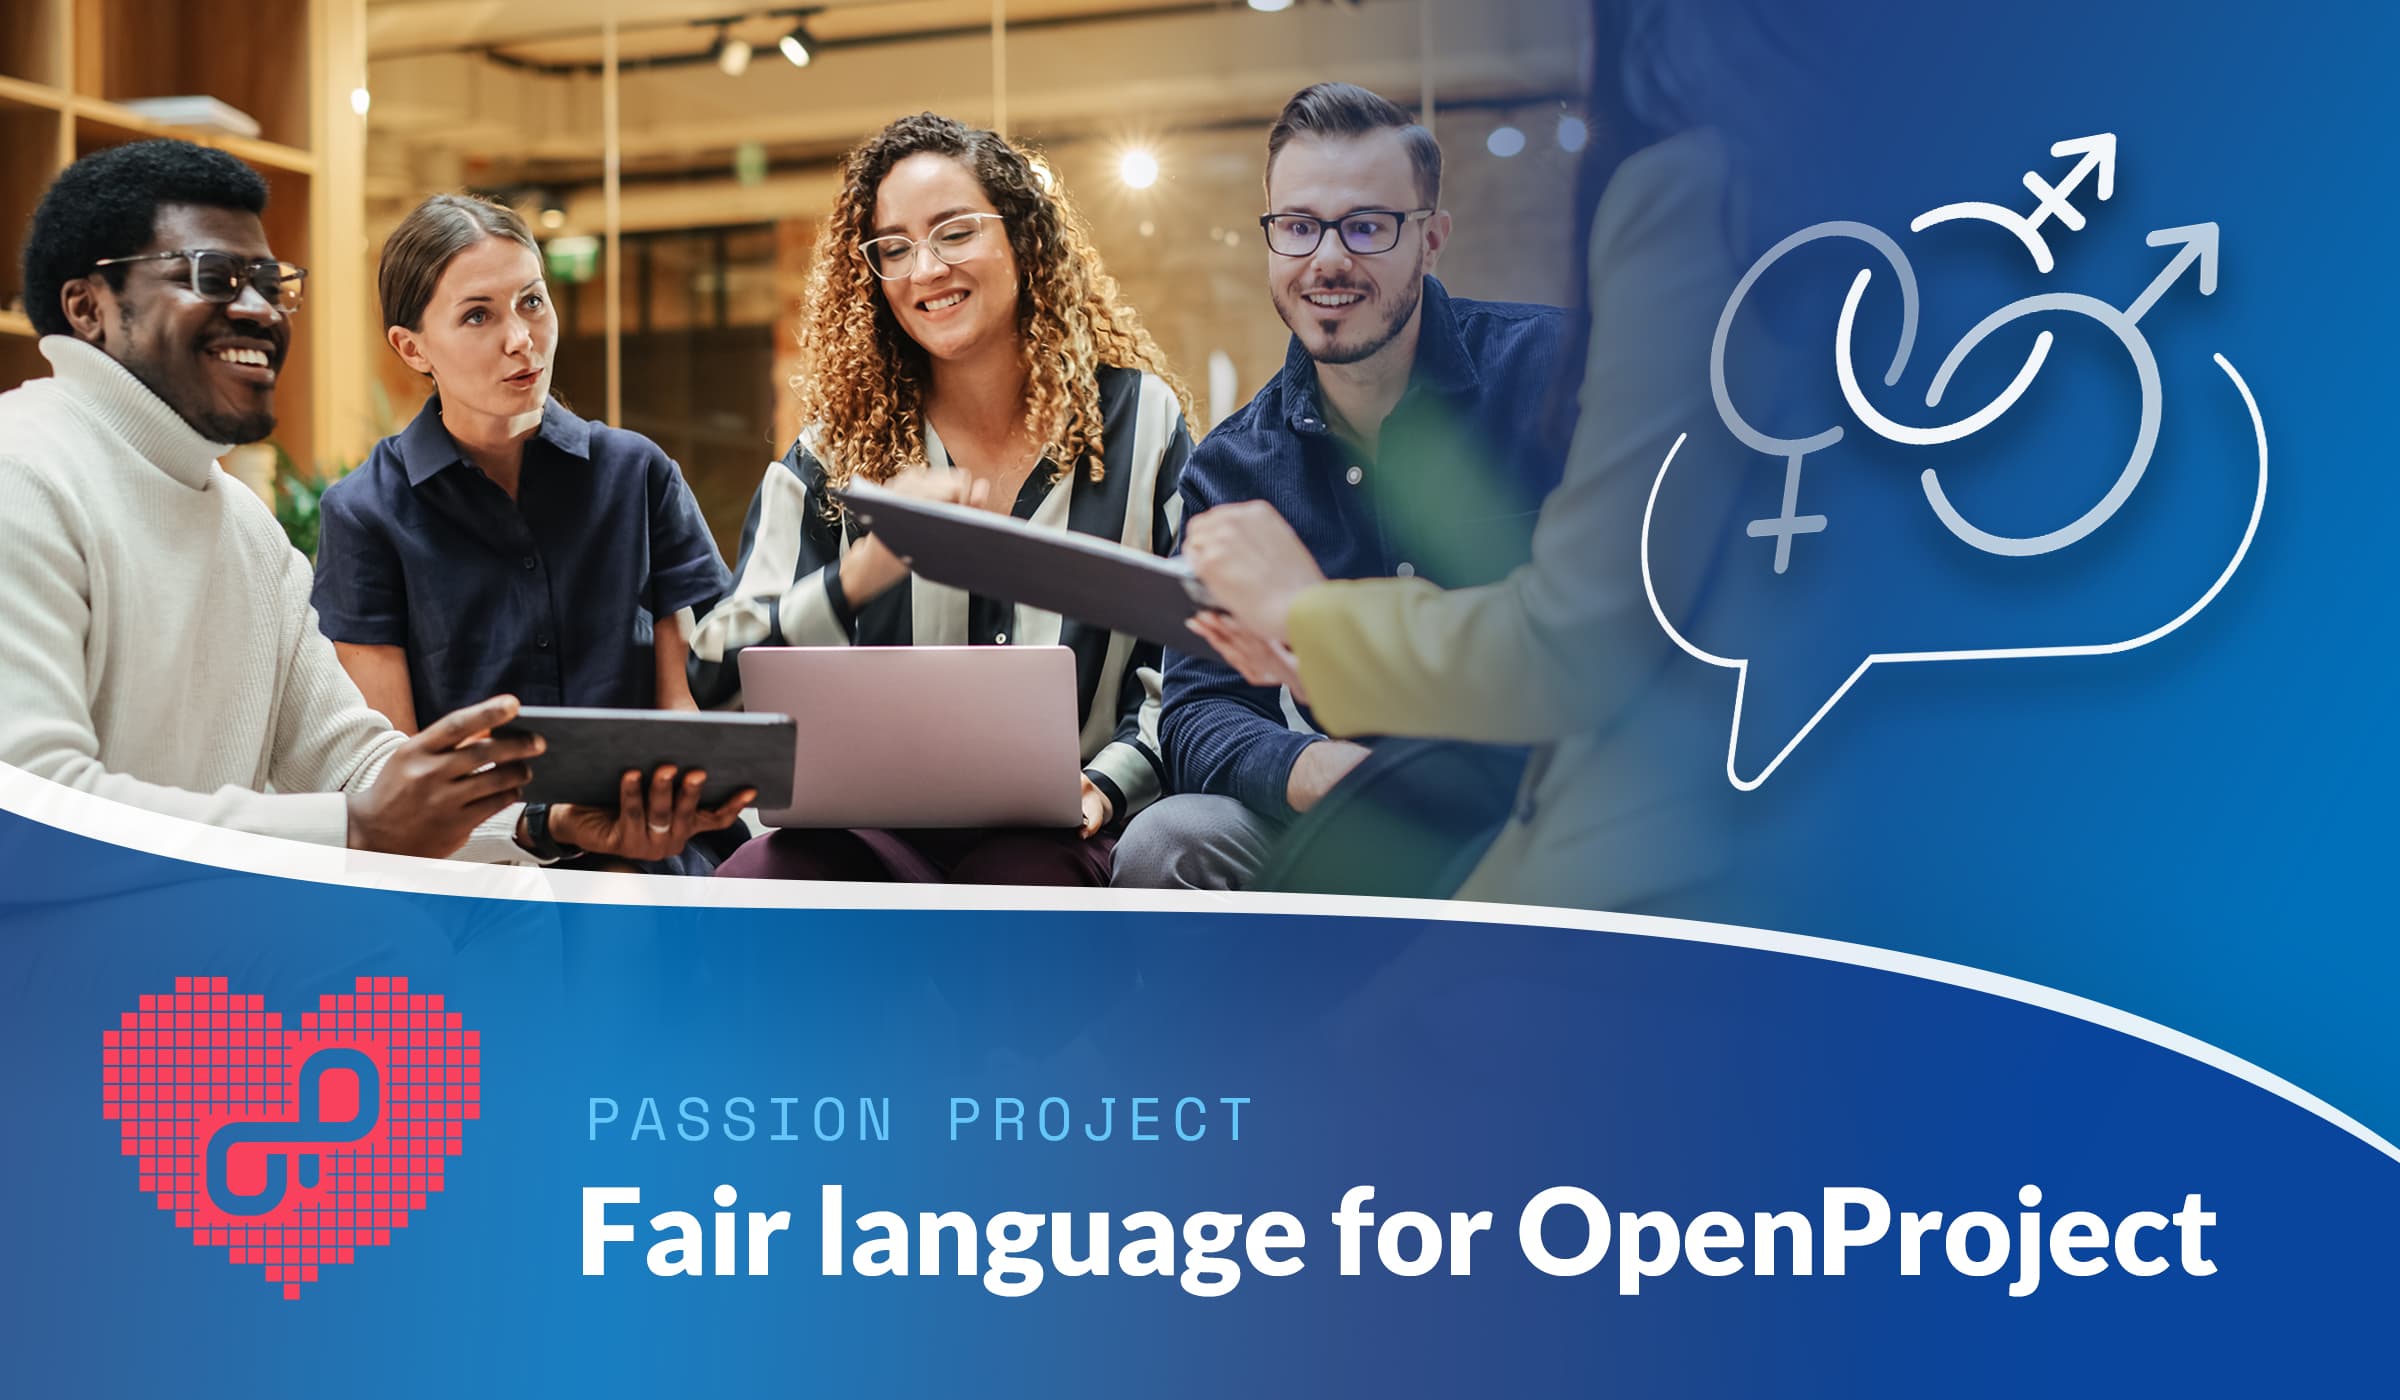 Passion project: Fair language for OpenProject